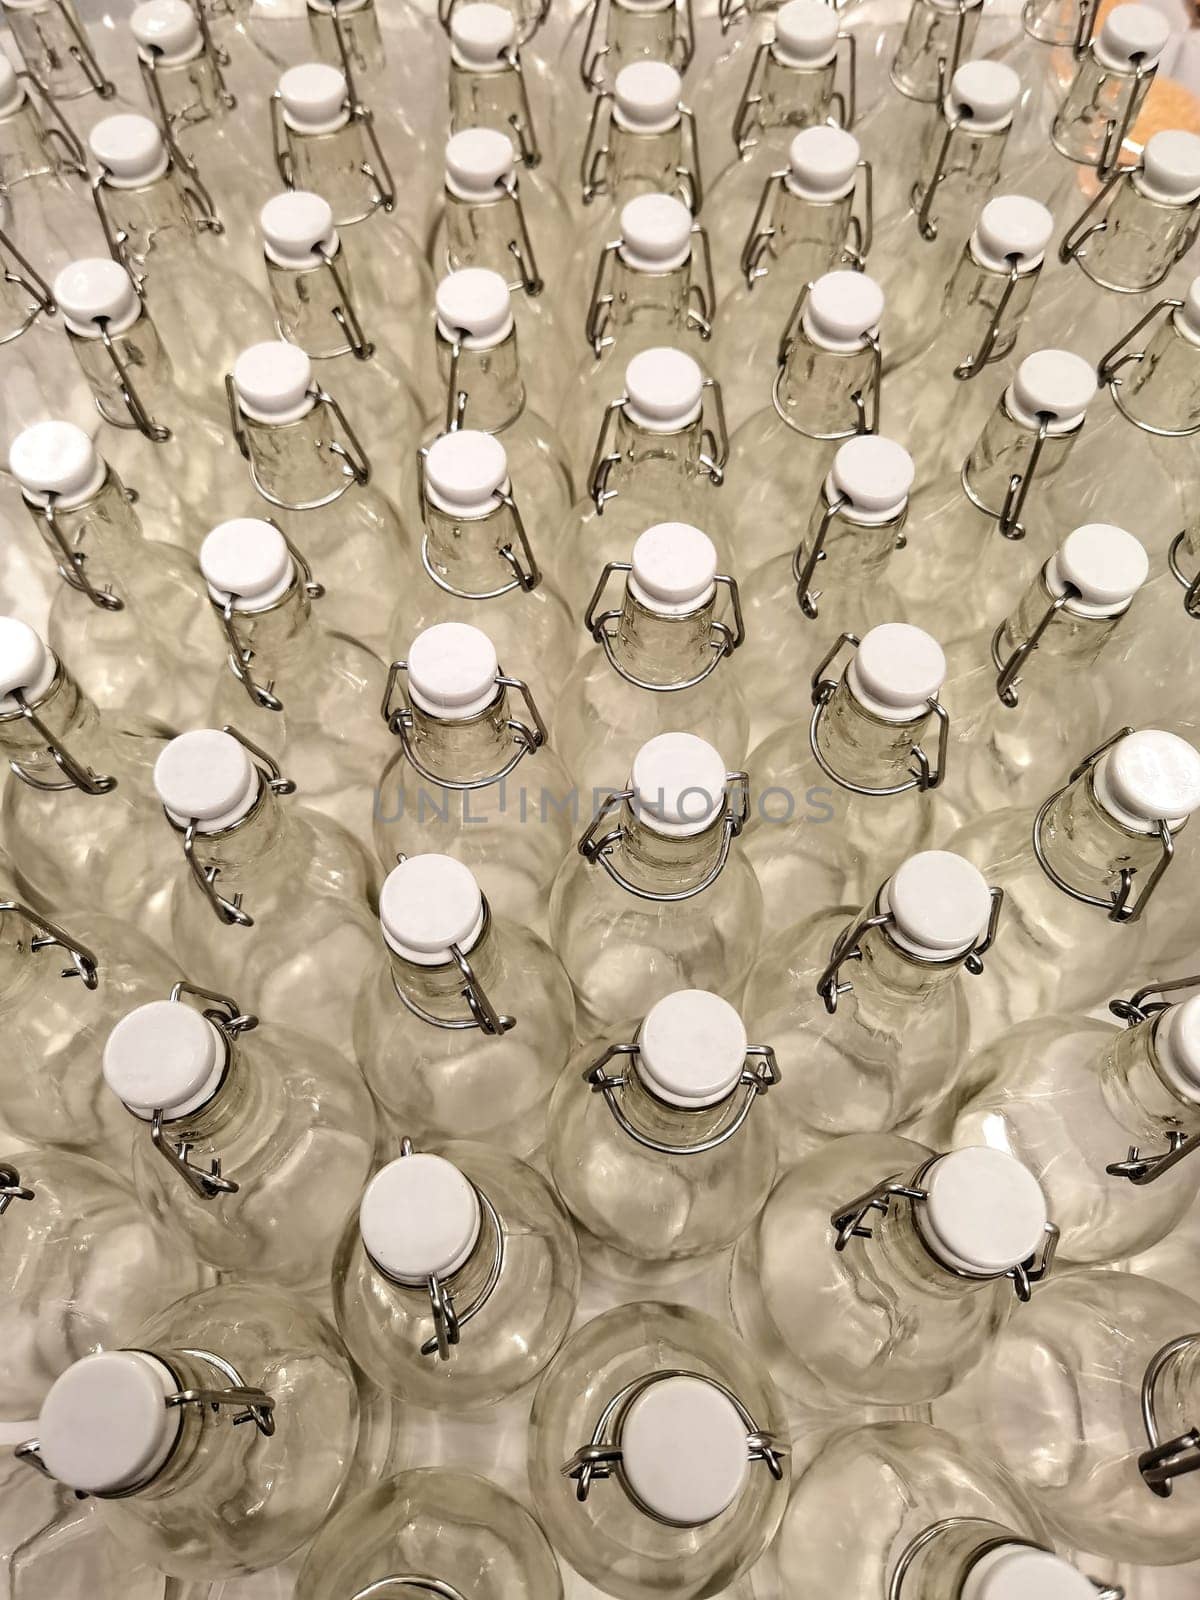 View of many empty glass bottle from above